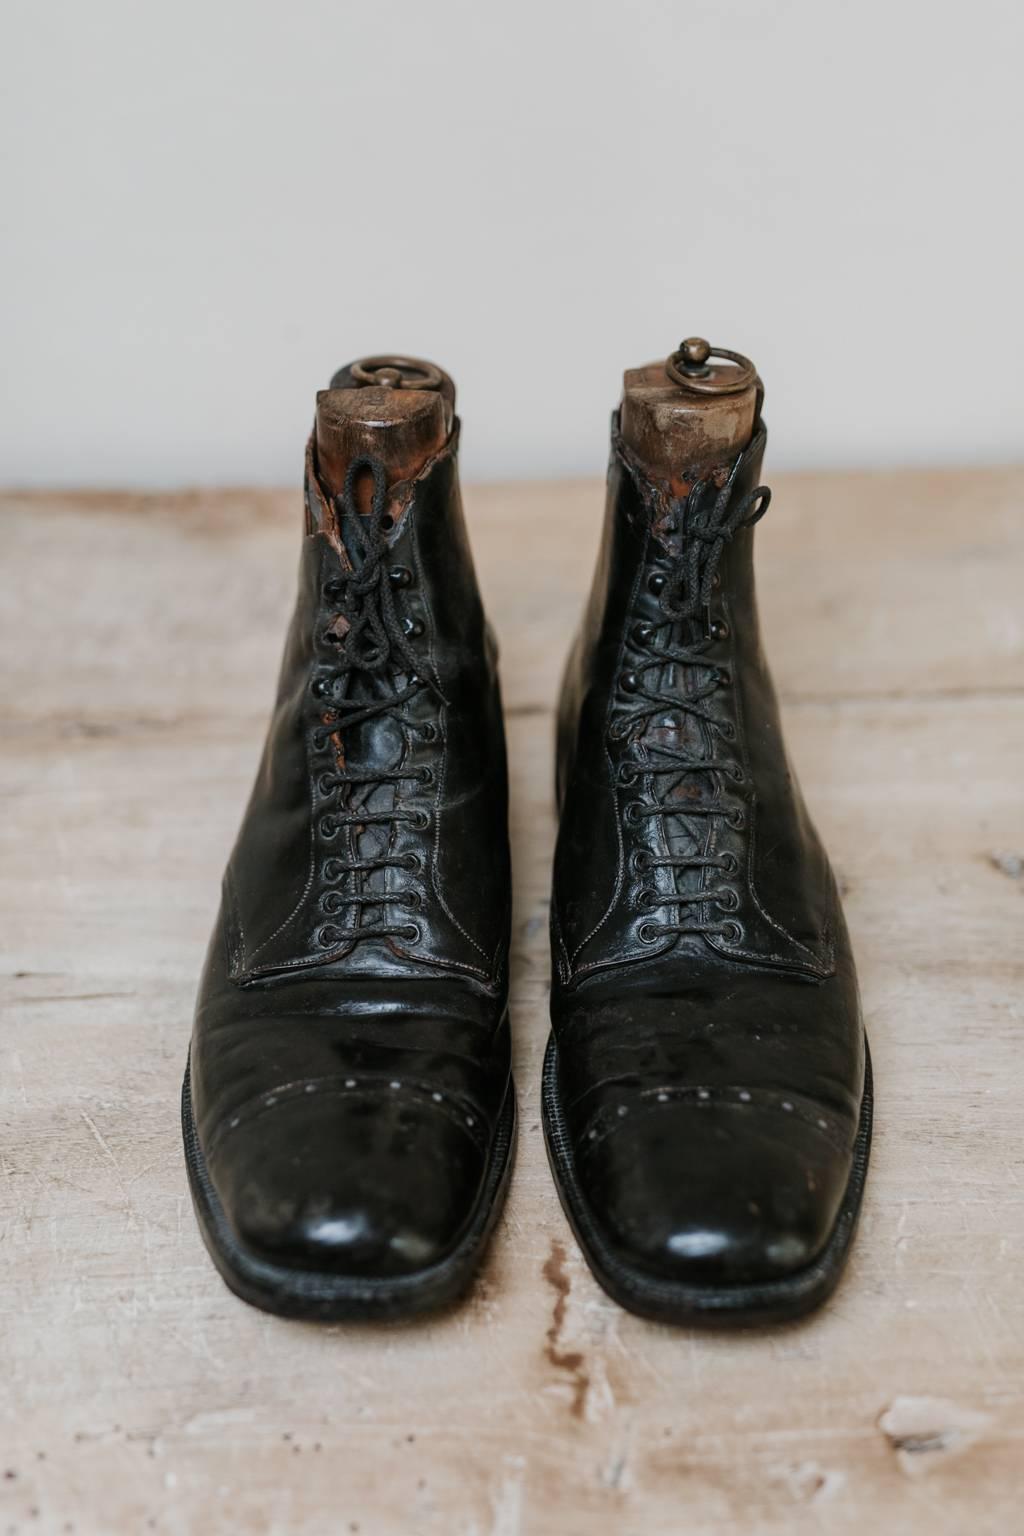 Pair of black leather giant shoes, great object for an eccentric, out of the ordinary, quirky collection ... the pair of shoes are from obviously a giant of a man with giant sized feet measuring size 19 UK or 20 USA size. Both leather shoes have